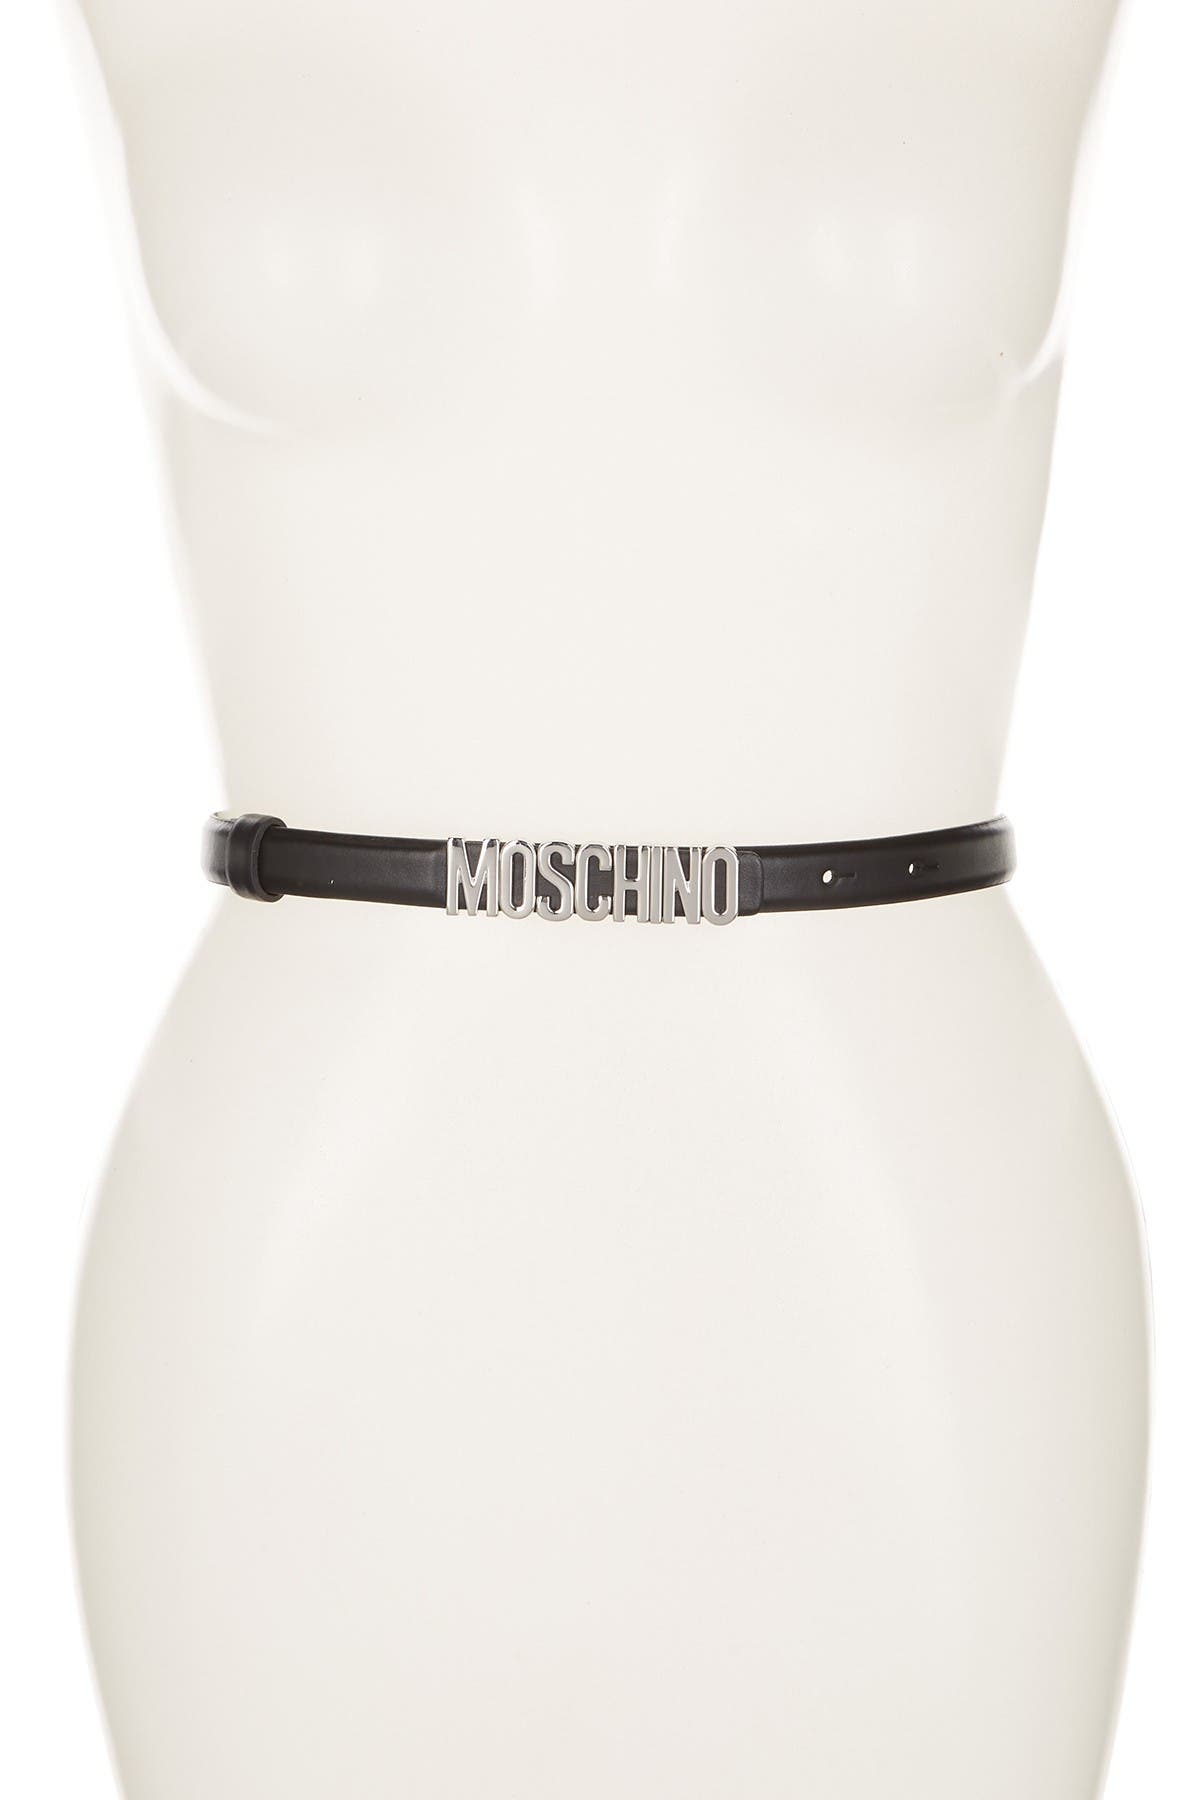 moschino belt silver letters